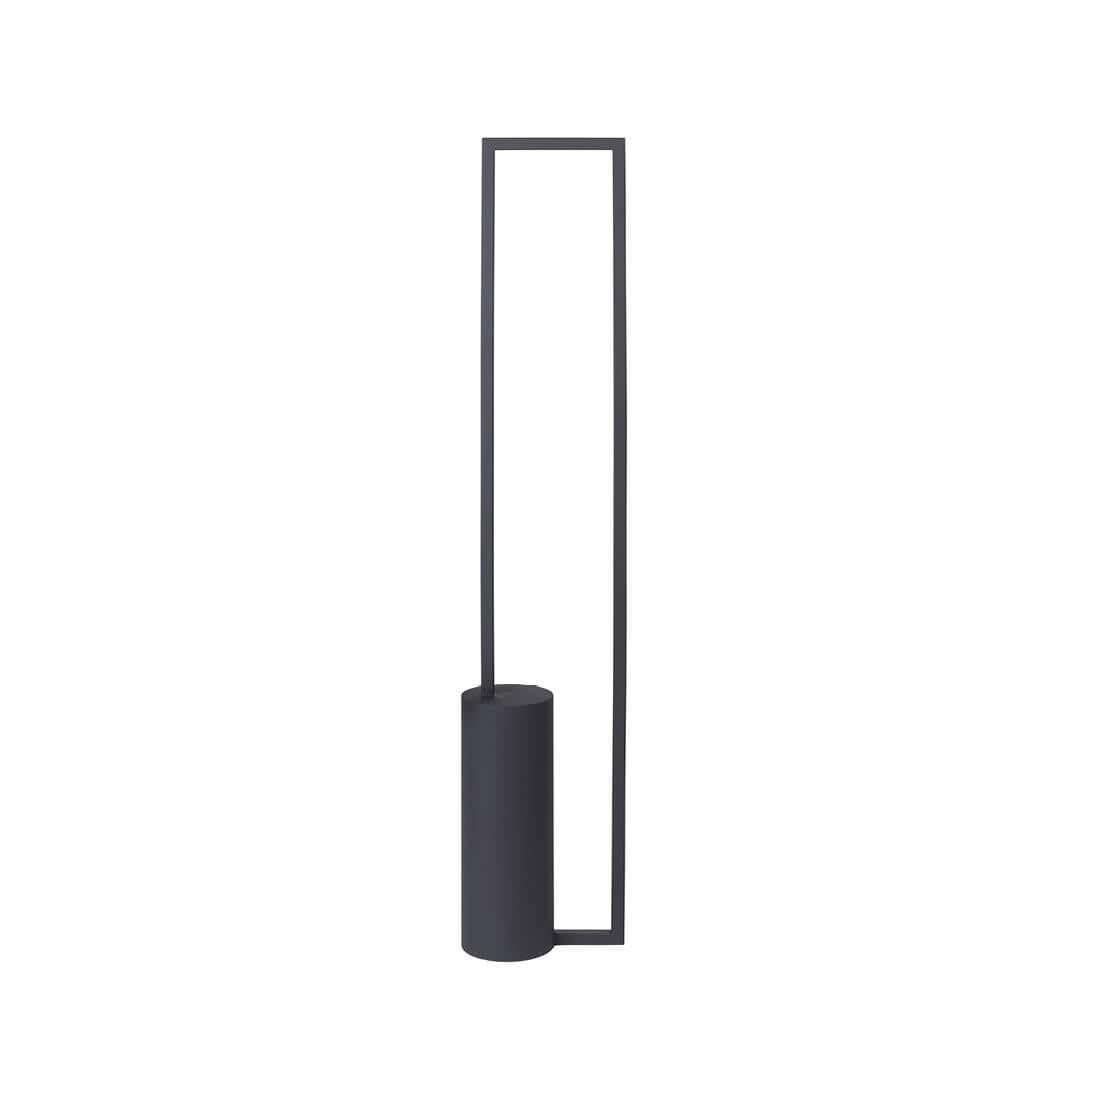 Cylinder floor lamp by Kristina Dam Studio
Materials: Black steel. LED Lights.
Dimensions: 14 x 25 x H 130cm.

The Modernist furniture collection takes notions of modern design and yet the distinctive design touch of Kristina Dam Studio is